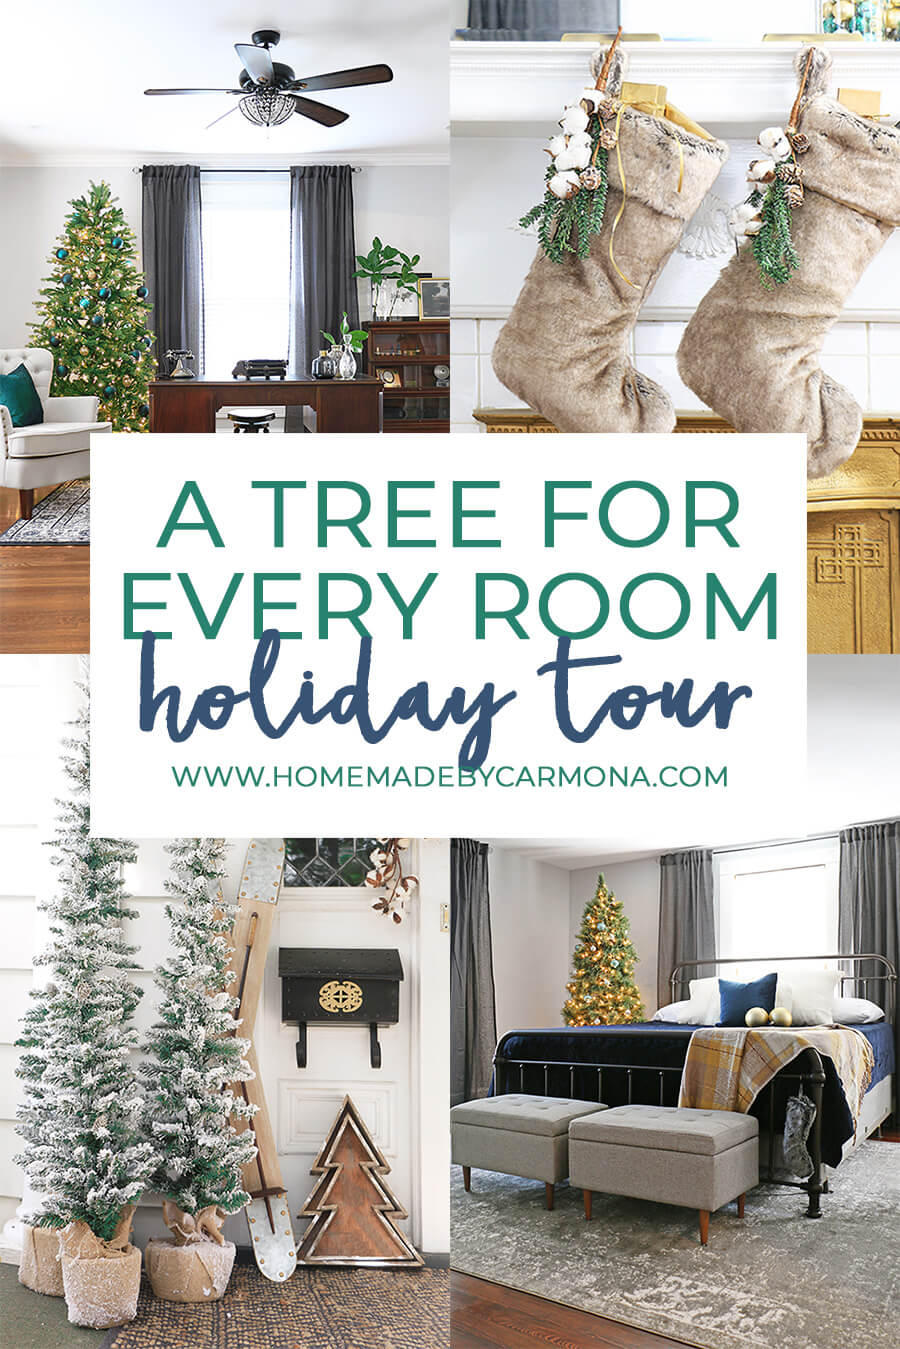 A-Tree-For-Every-Room-Holiday-Tour